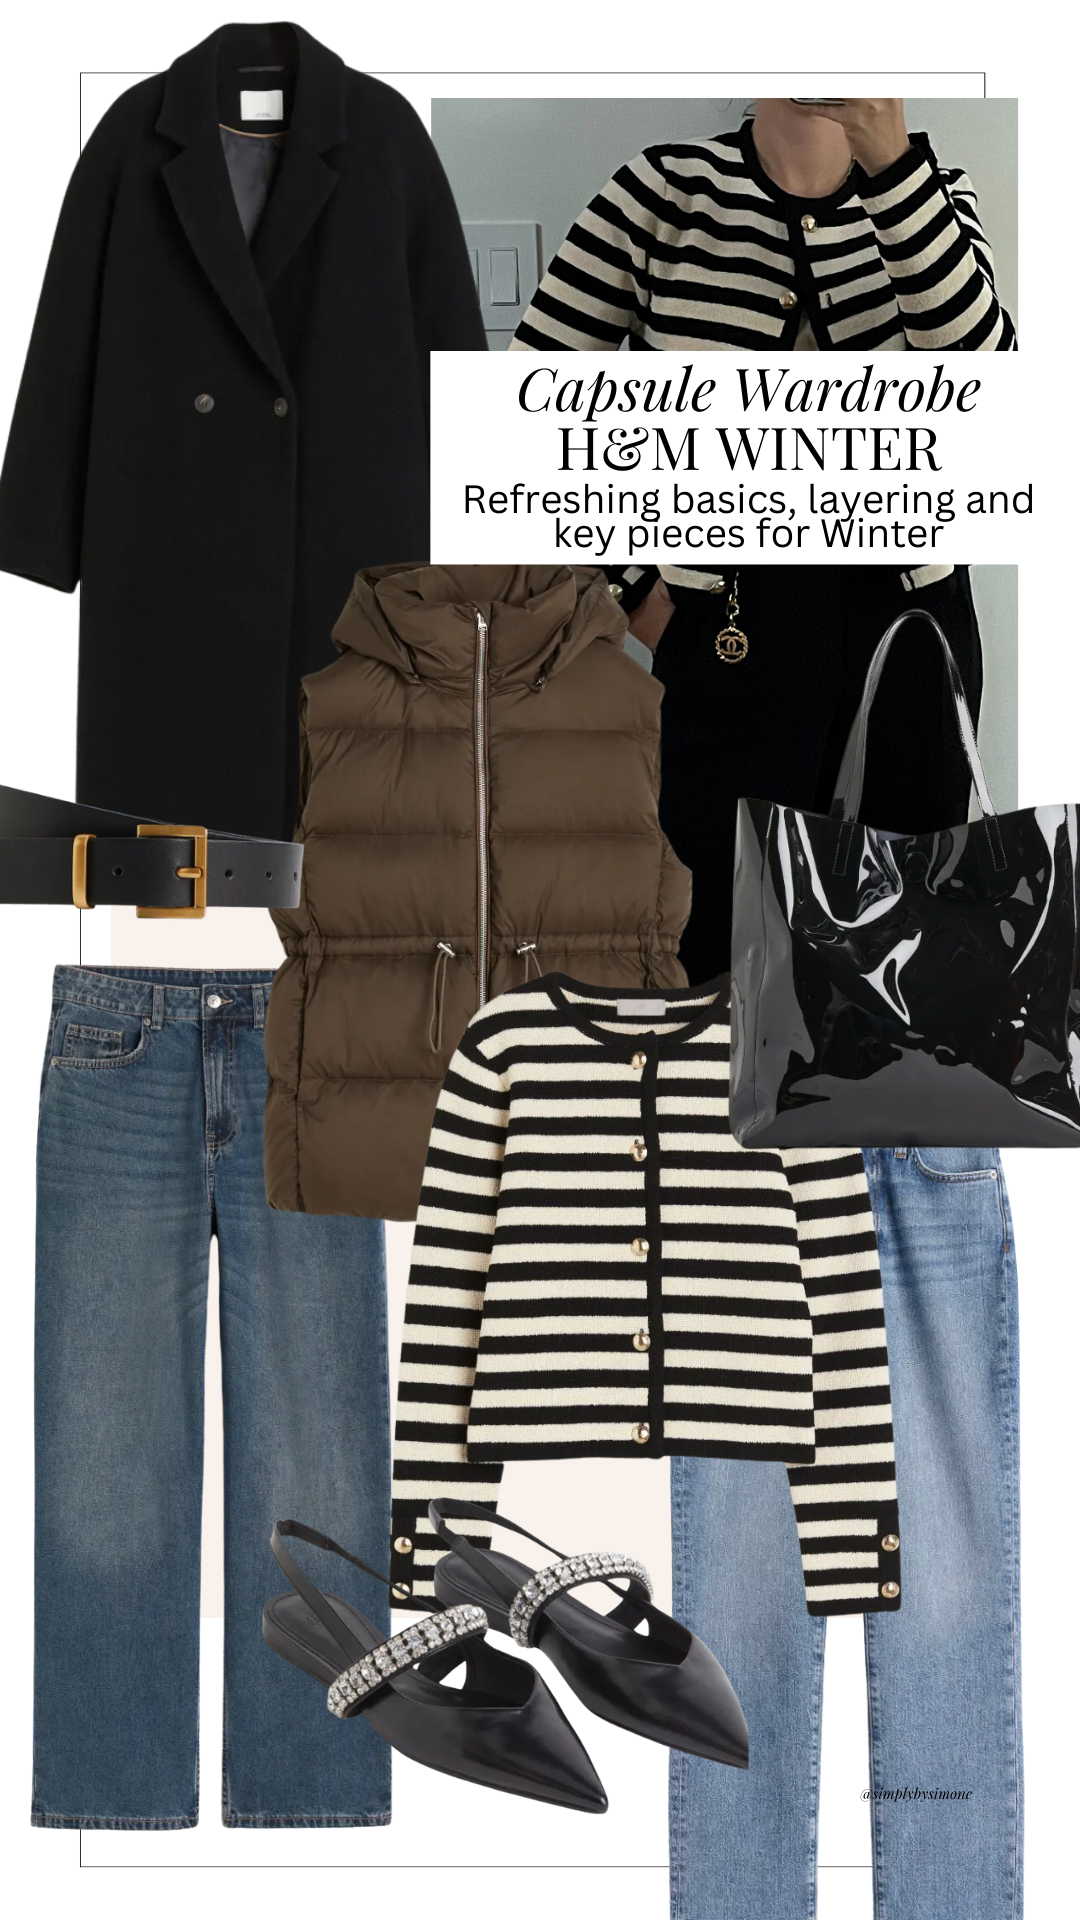 Collage of Winter clothing items used to create 48 outfit combinations